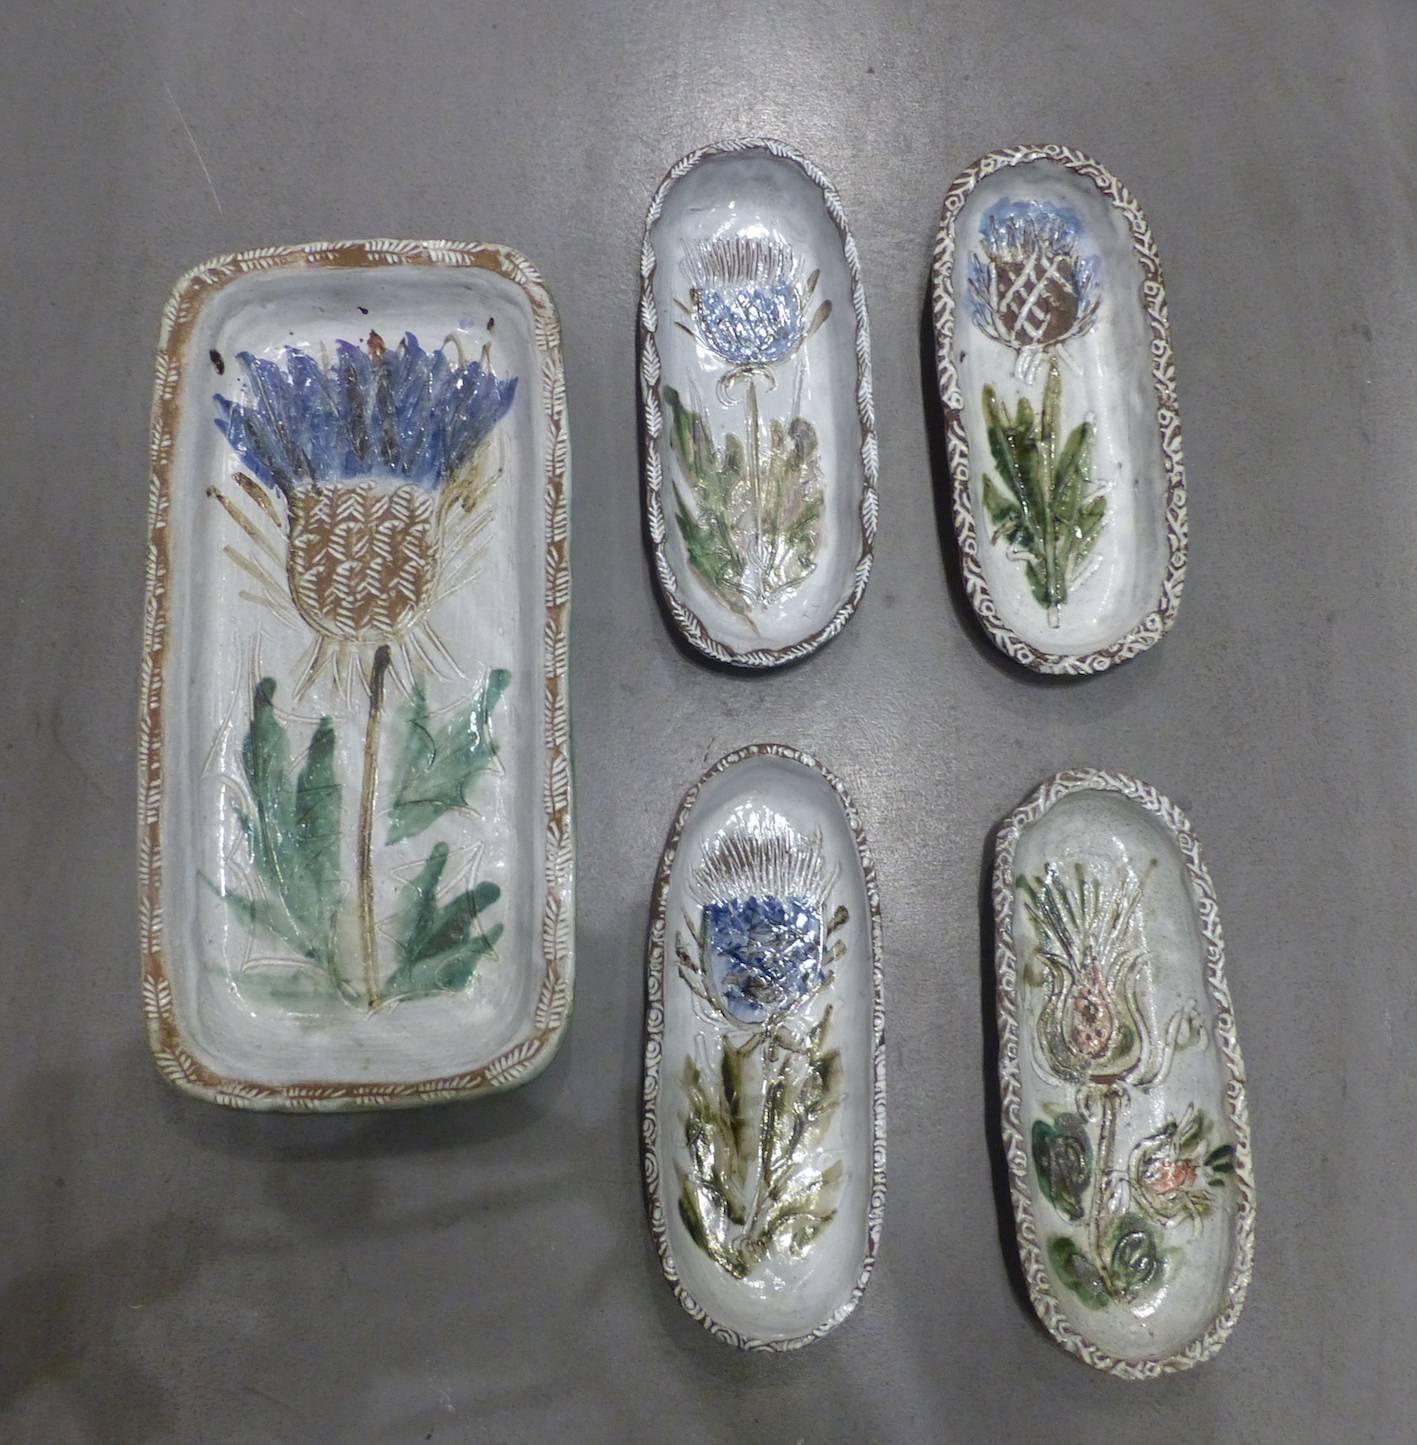 Albert Thiry beautiful set of five vides-poches, Vallauris circa 1960, in excellent condition
3x 29cm x 12cm x 3cm H
1x 44cm x 21cm x 4cm H.